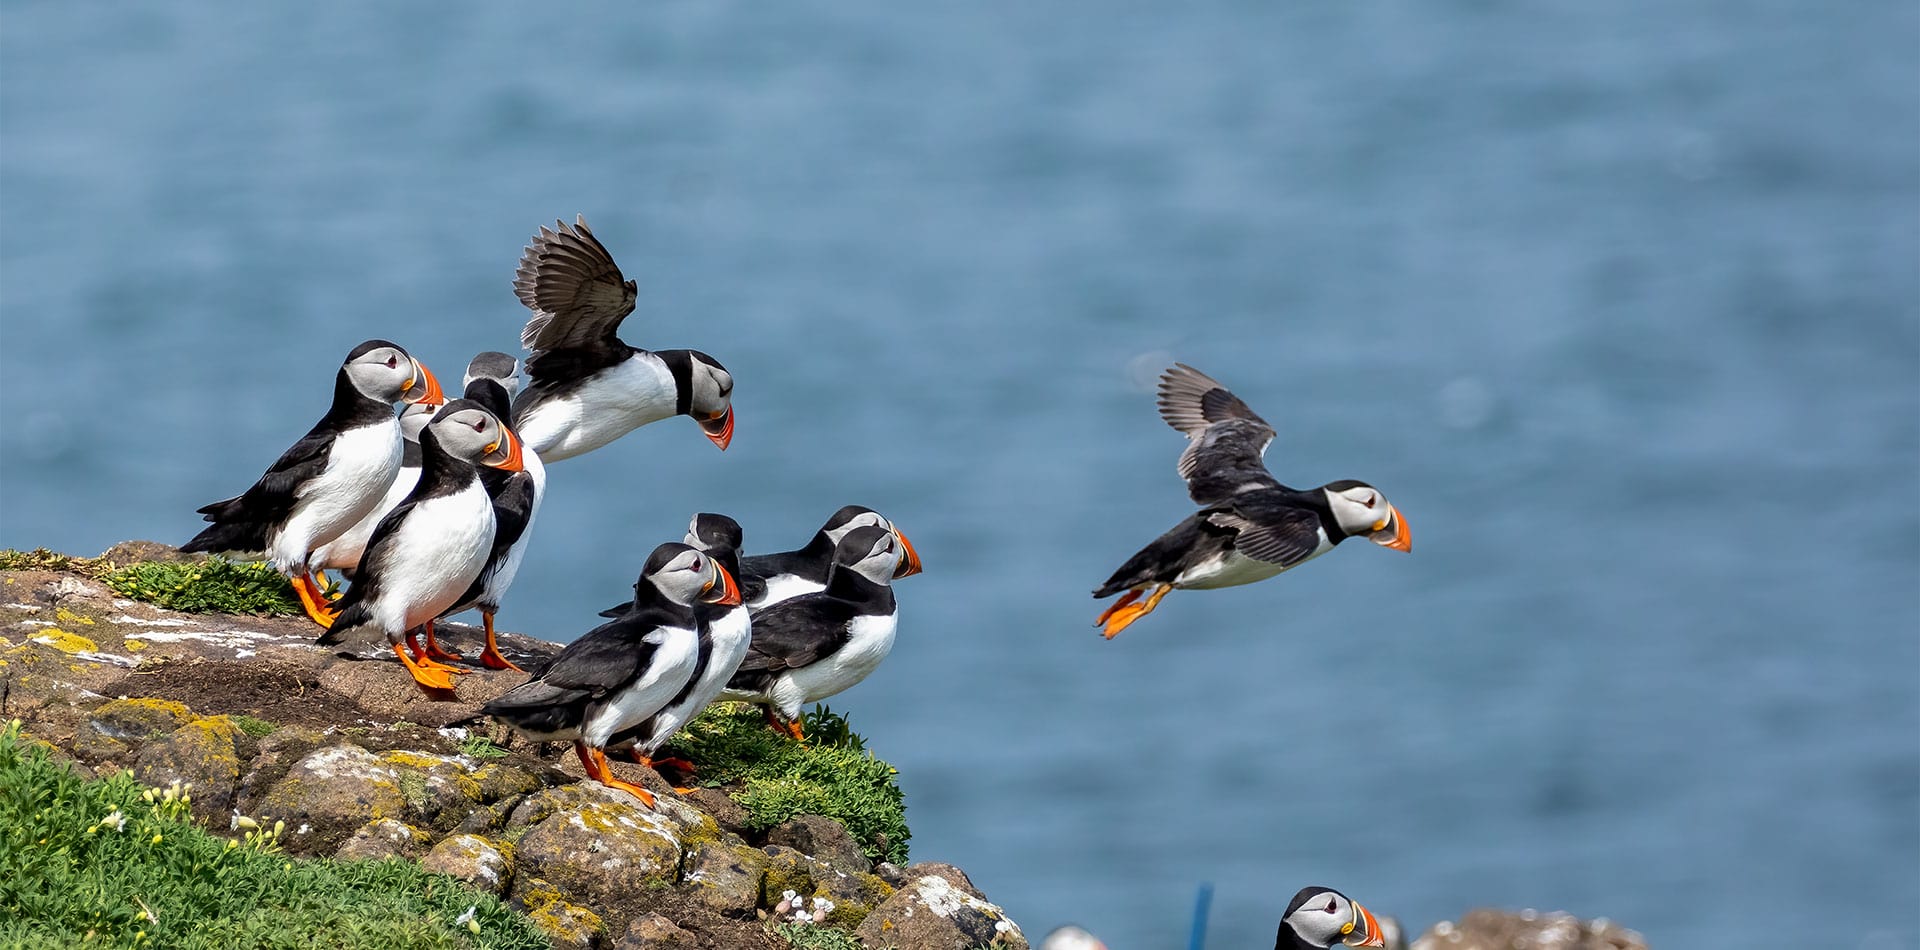 Puffins on a cliff, Scotland